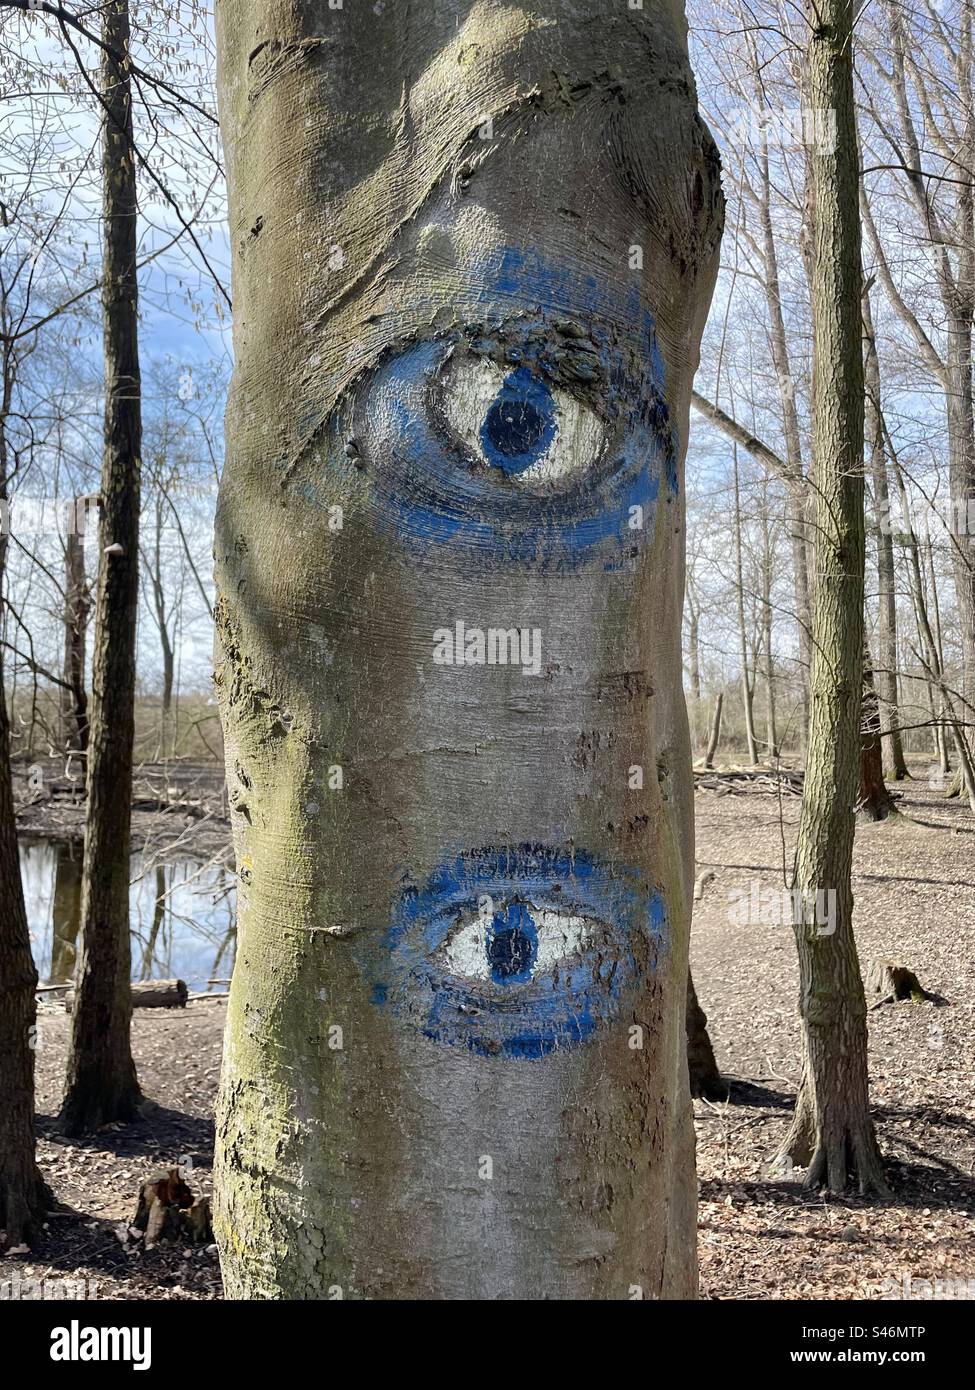 A tree trunk adorned with whimsical blue-painted eyes, infusing a touch of enchantment into the natural world. Stock Photo